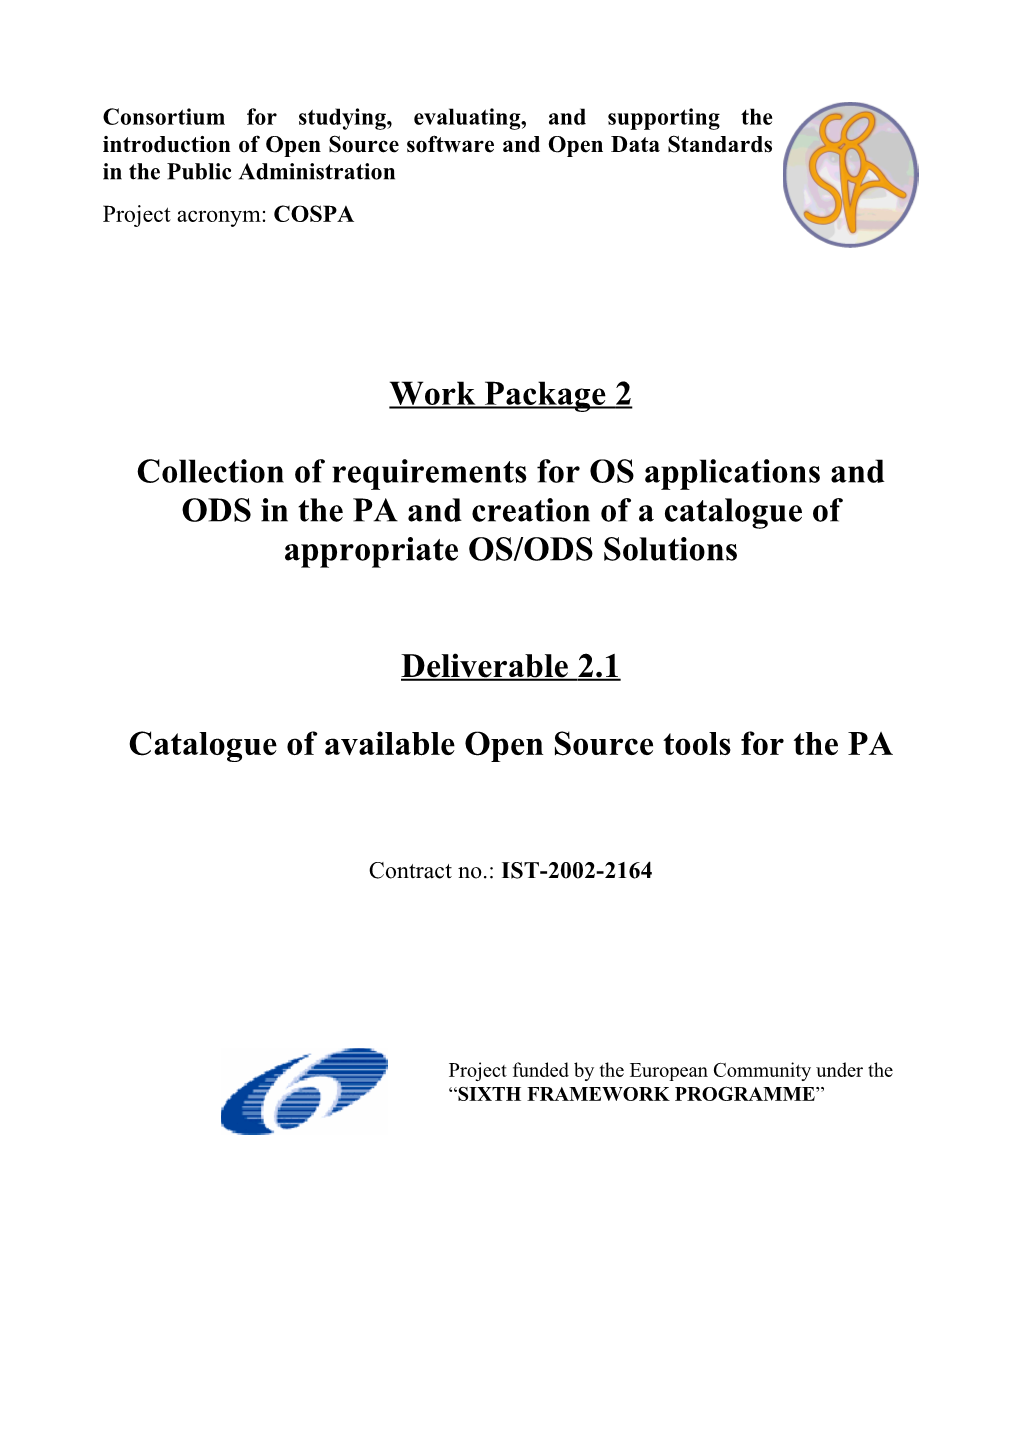 Work Package 2 Collection of Requirements for OS